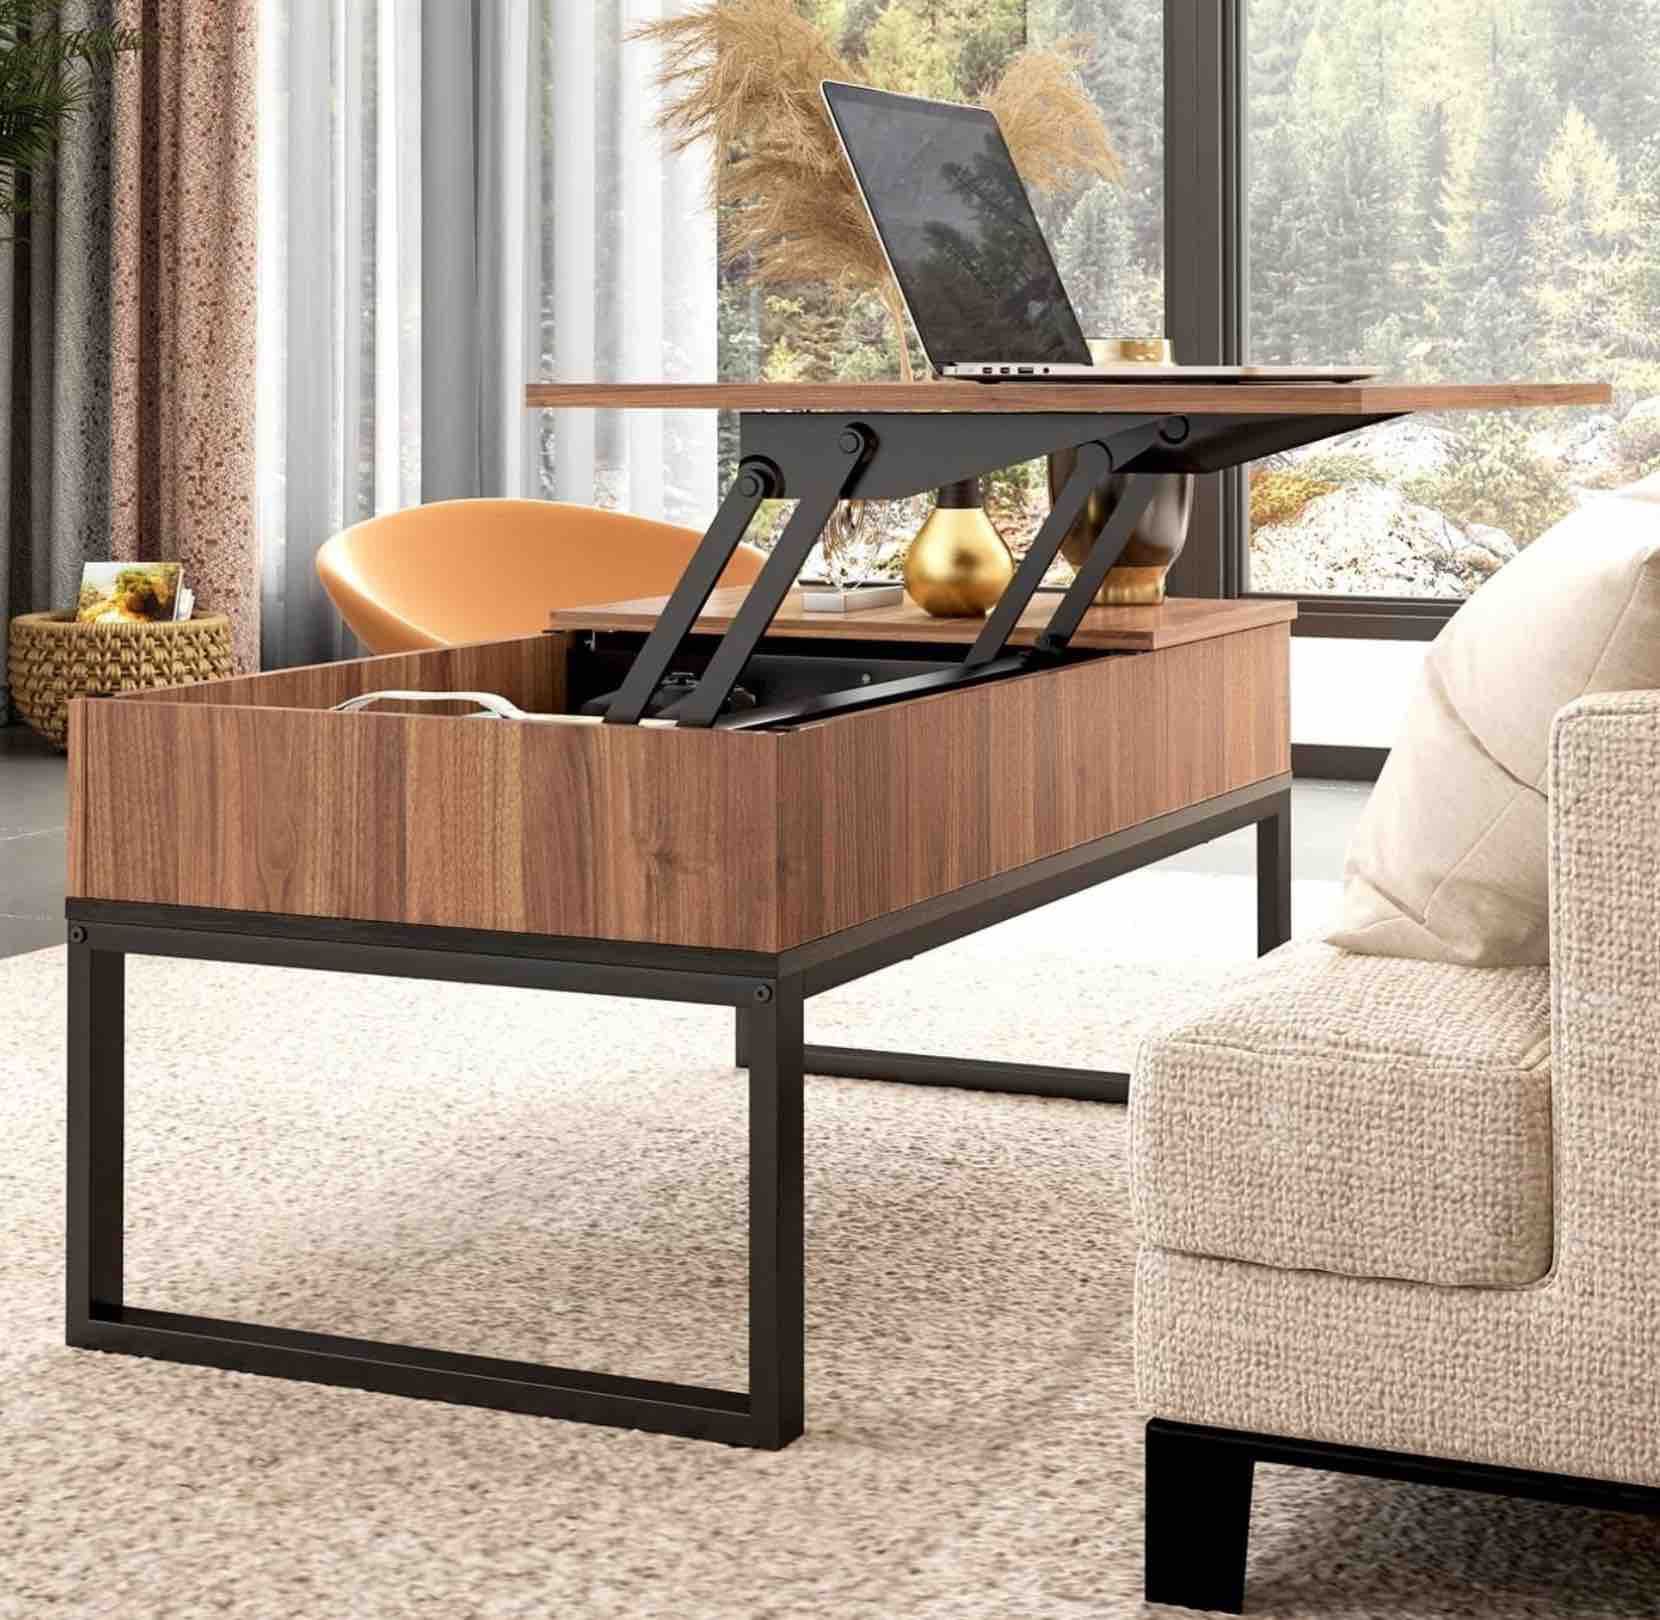 Wlive Pop Up Coffee Table With Hidden Storage Compartments — Tools And Toys Inside Lift Top Coffee Tables With Hidden Storage Compartments (View 14 of 15)